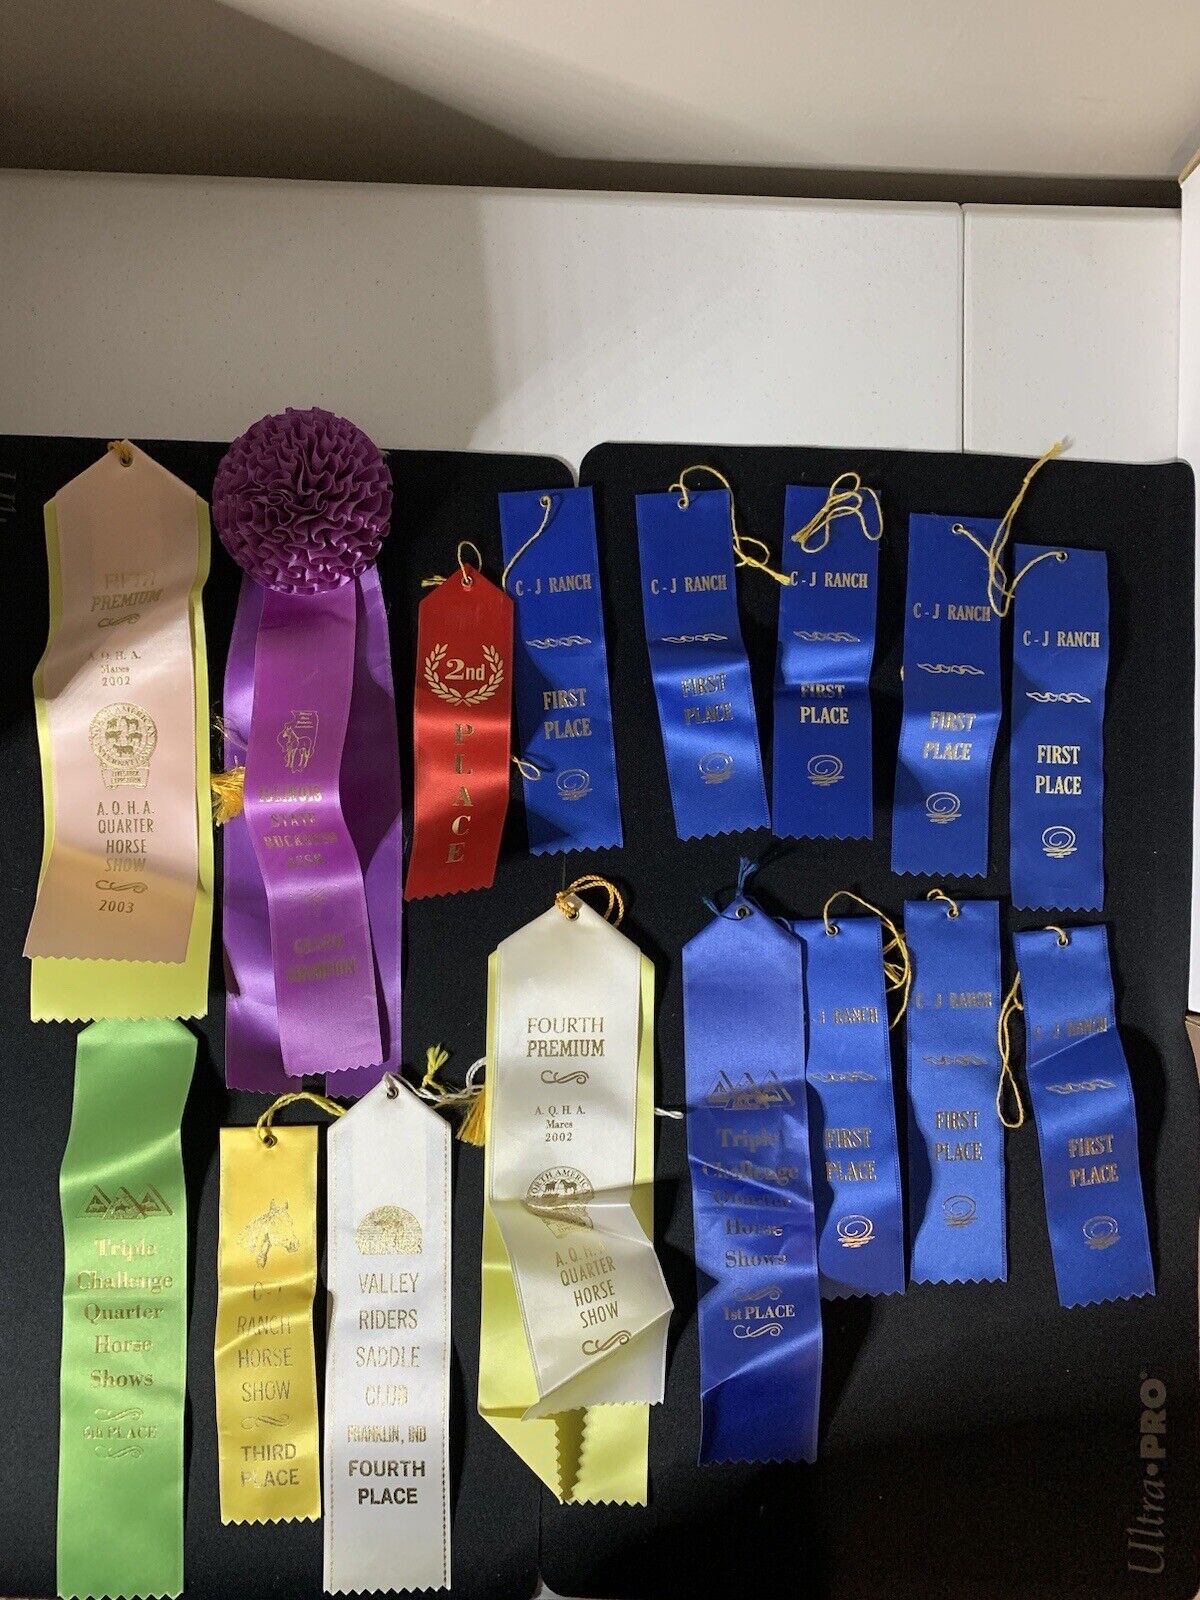 horse show ribbons lot (16) A.Q.H.A Show, Illinois St Grand Champ Valley Saddle